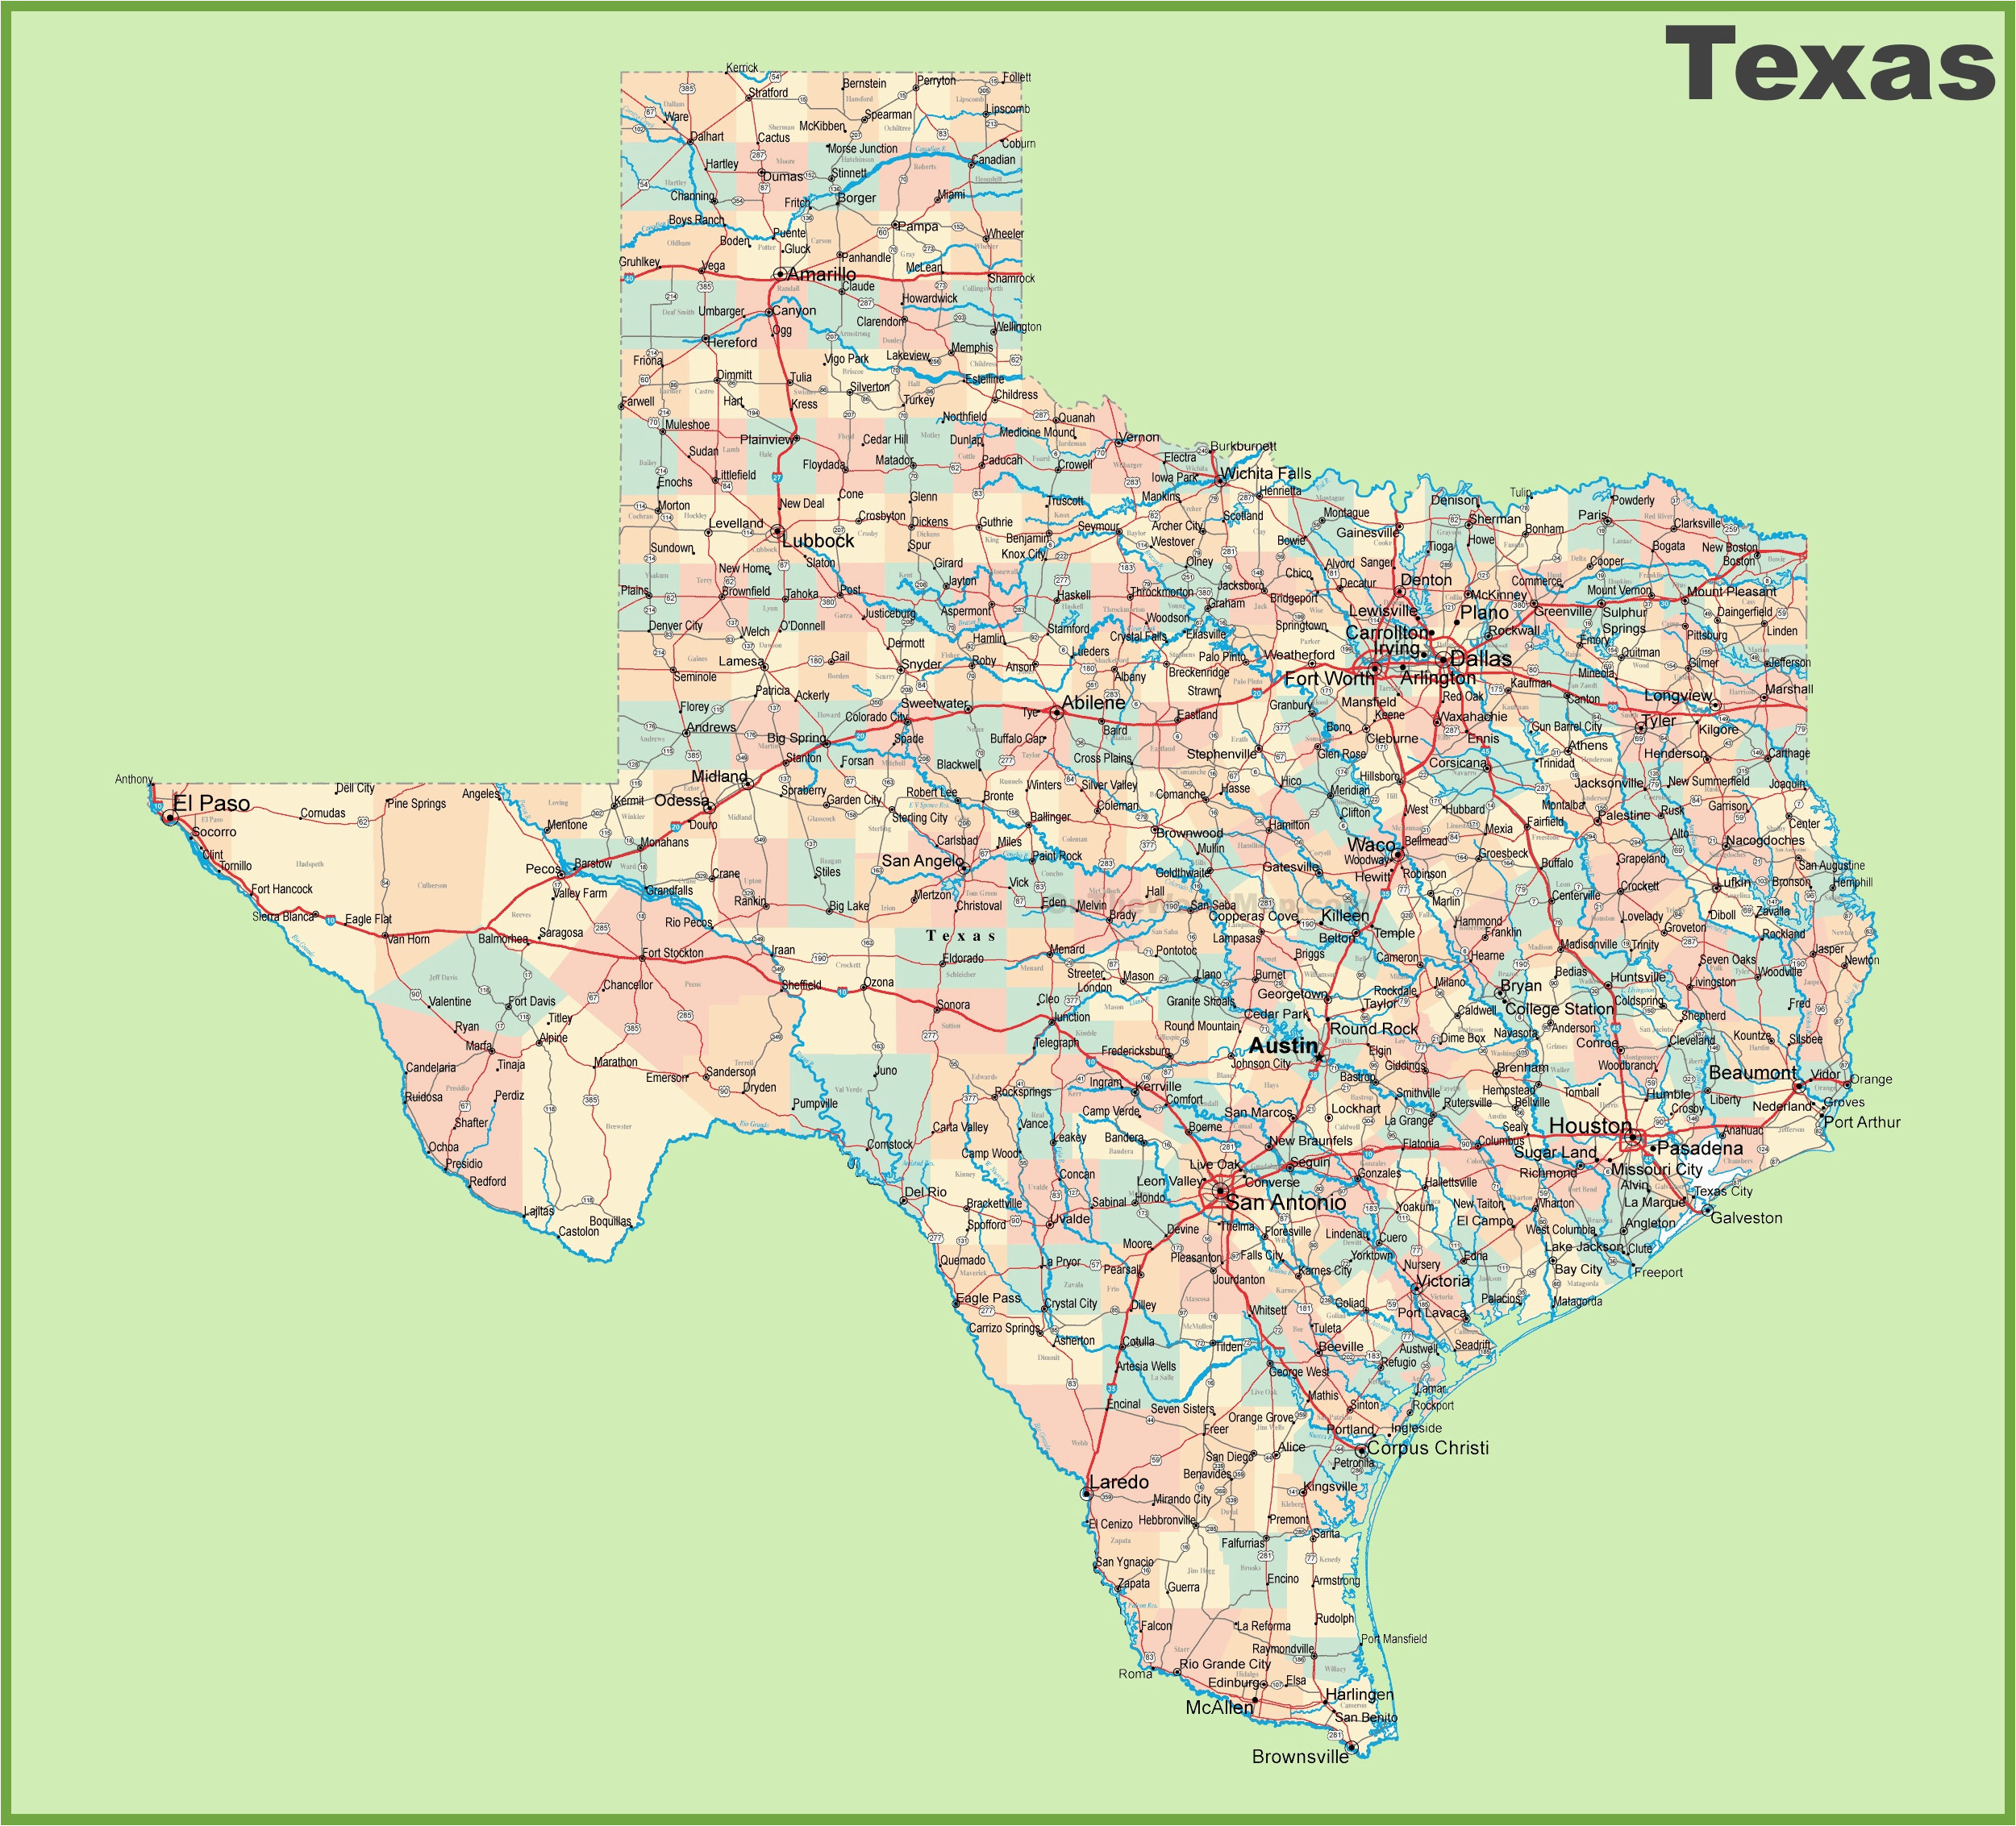 Texas Road Map Printable Road Map Of Texas with Cities